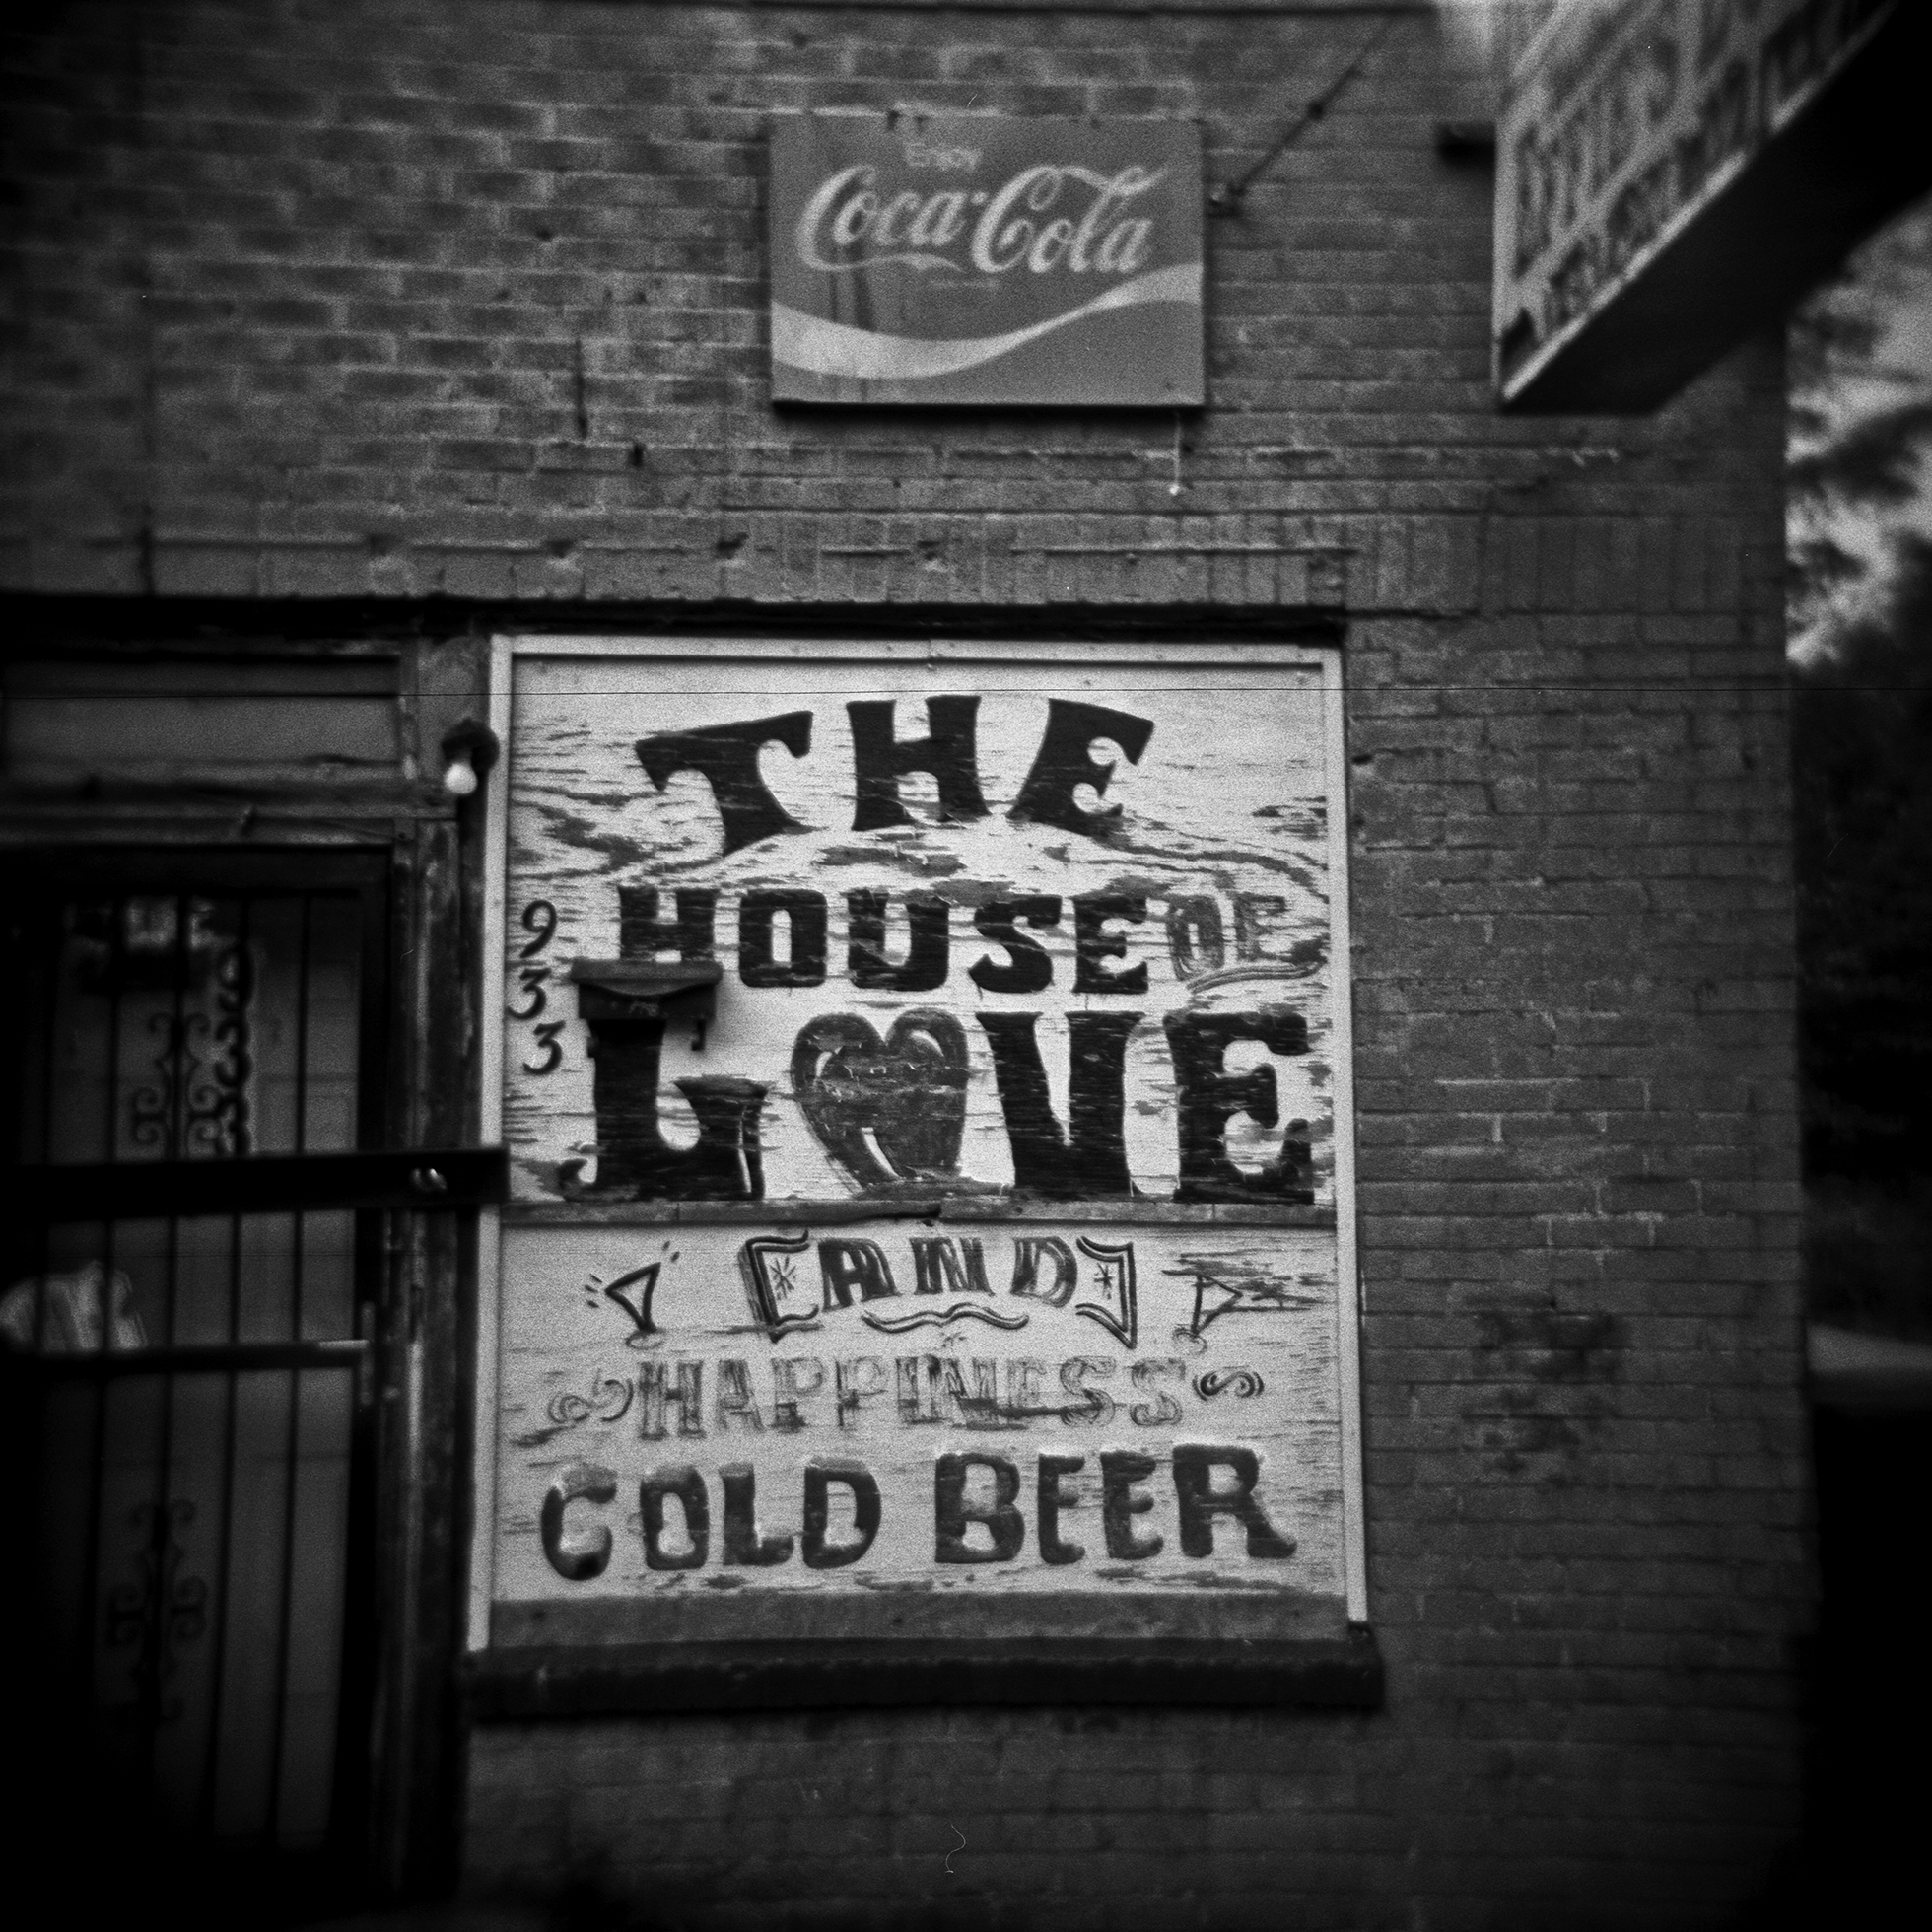 A brick building with an Enjoy Coca-Cola sign above a large sign next to the door that reads 933 The House of Love and Happiness Cold Beer.